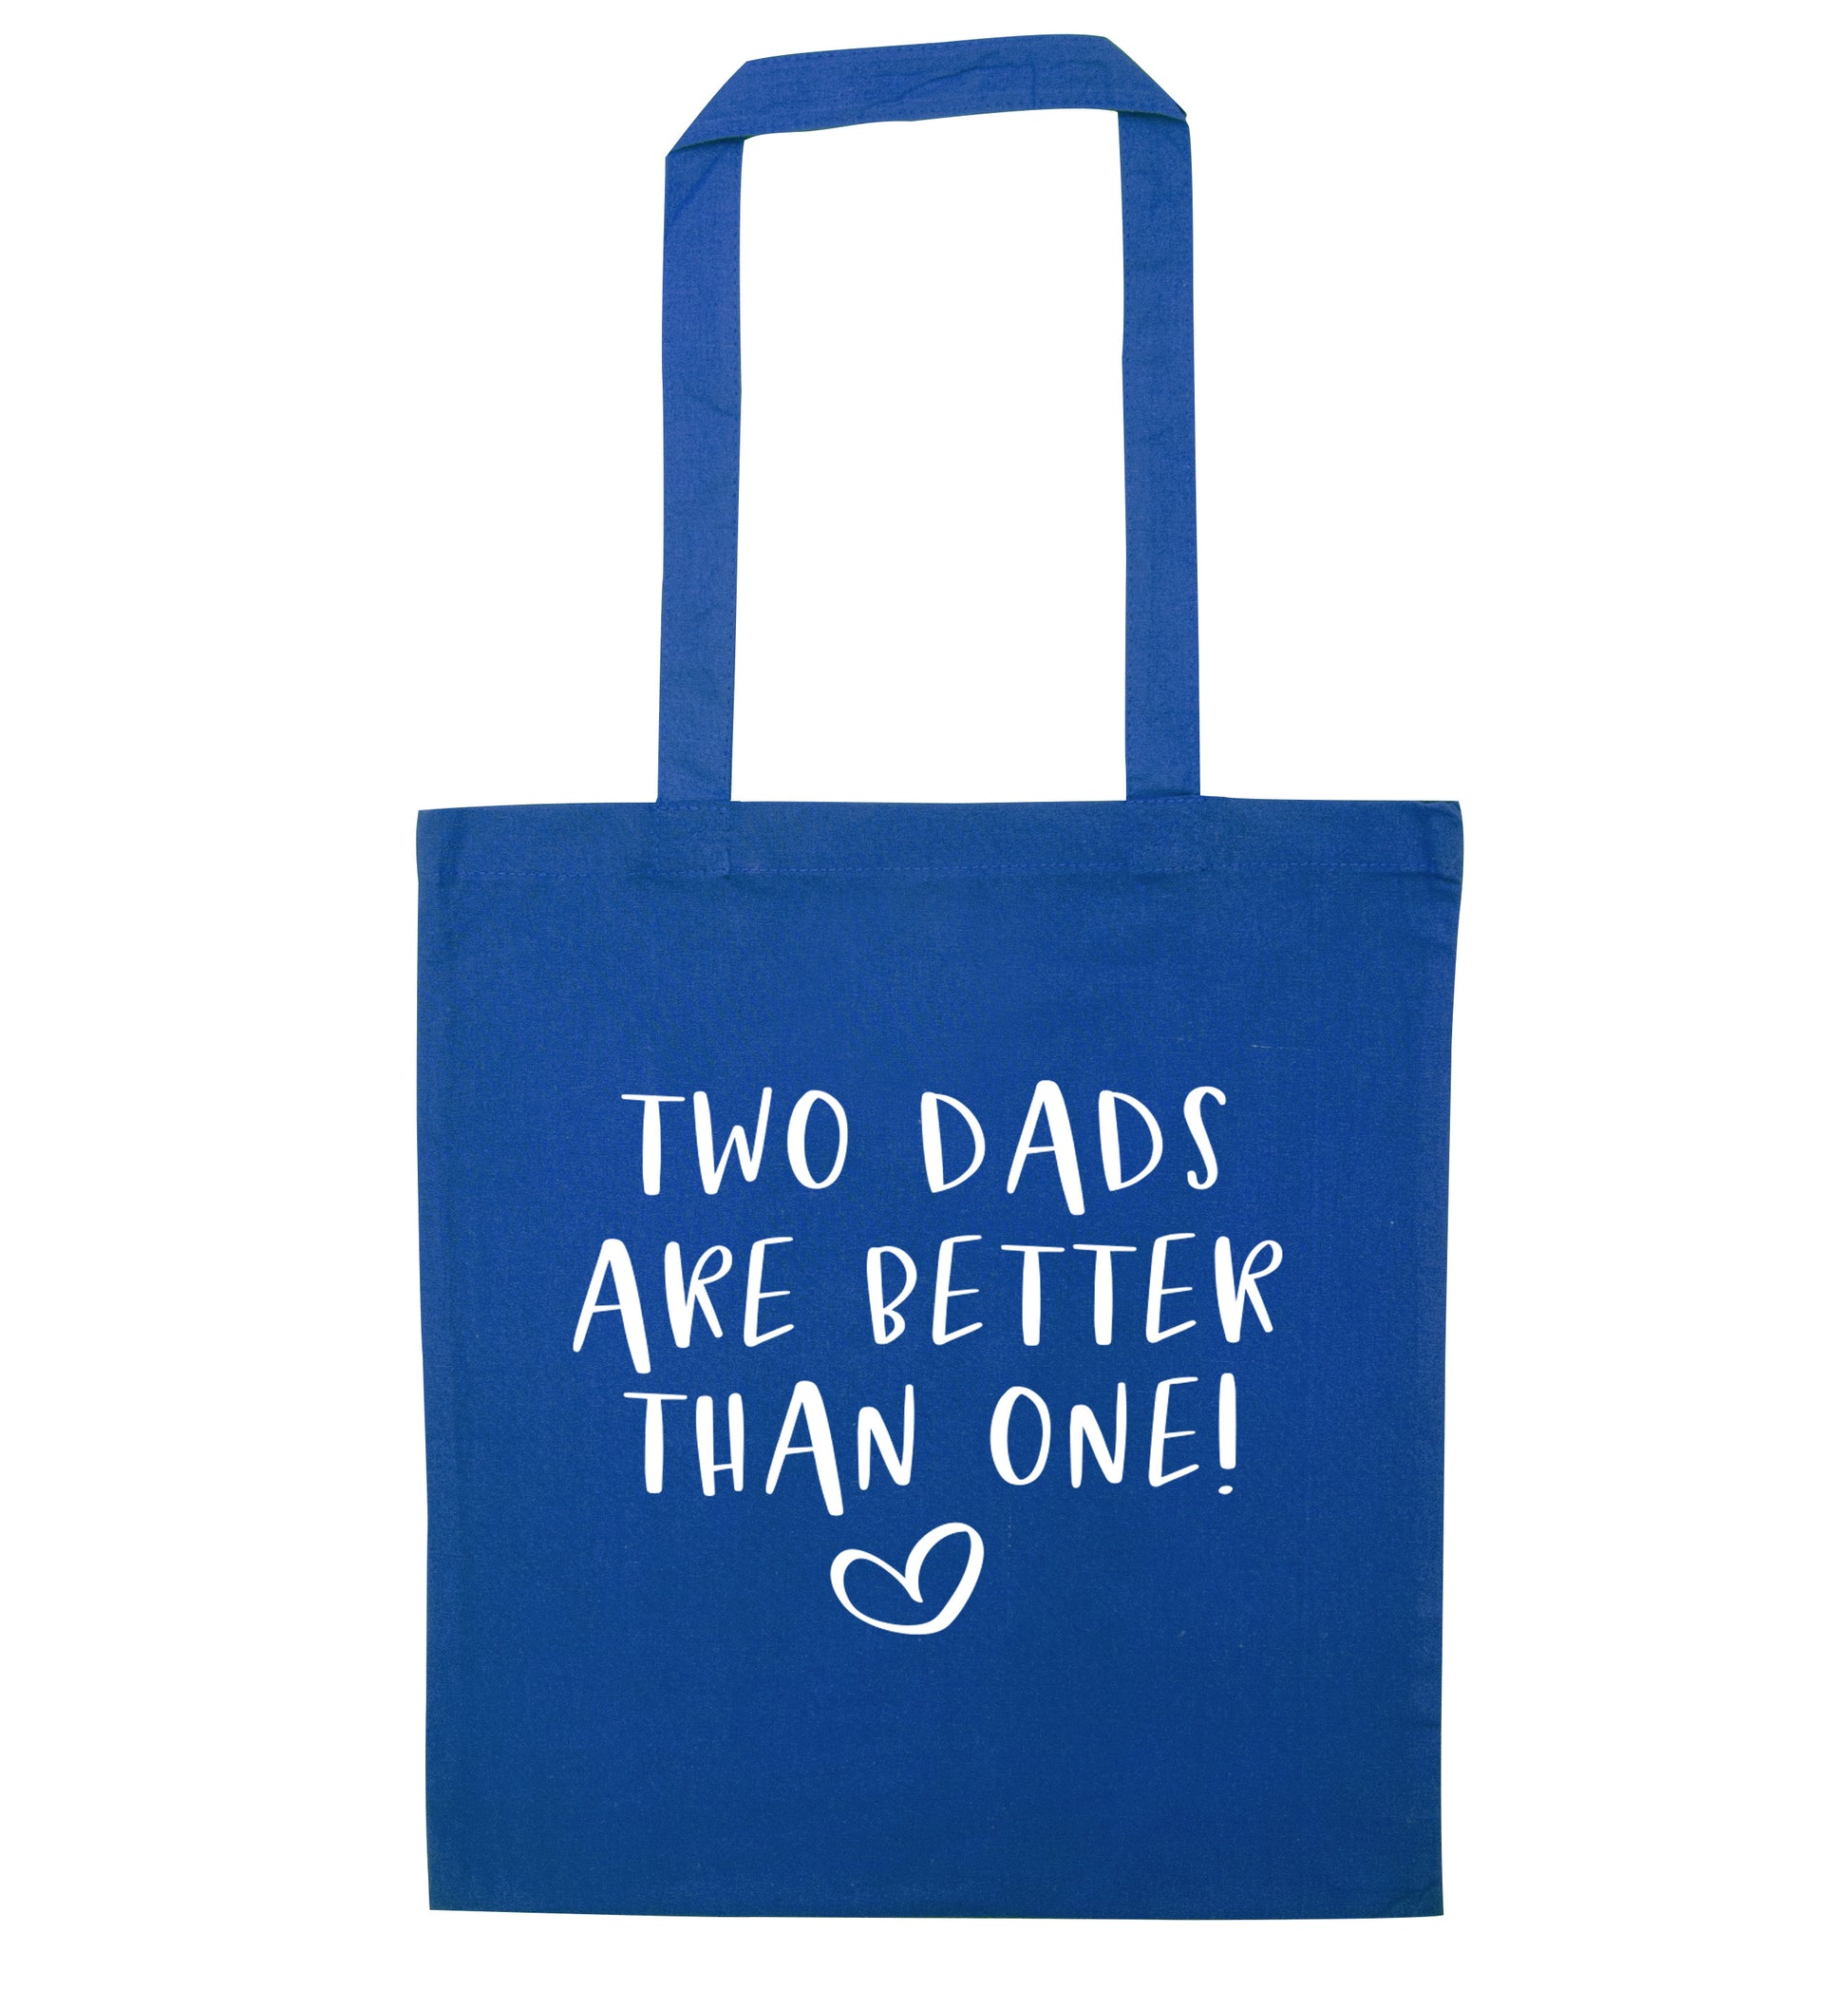 Two dads are better than one blue tote bag